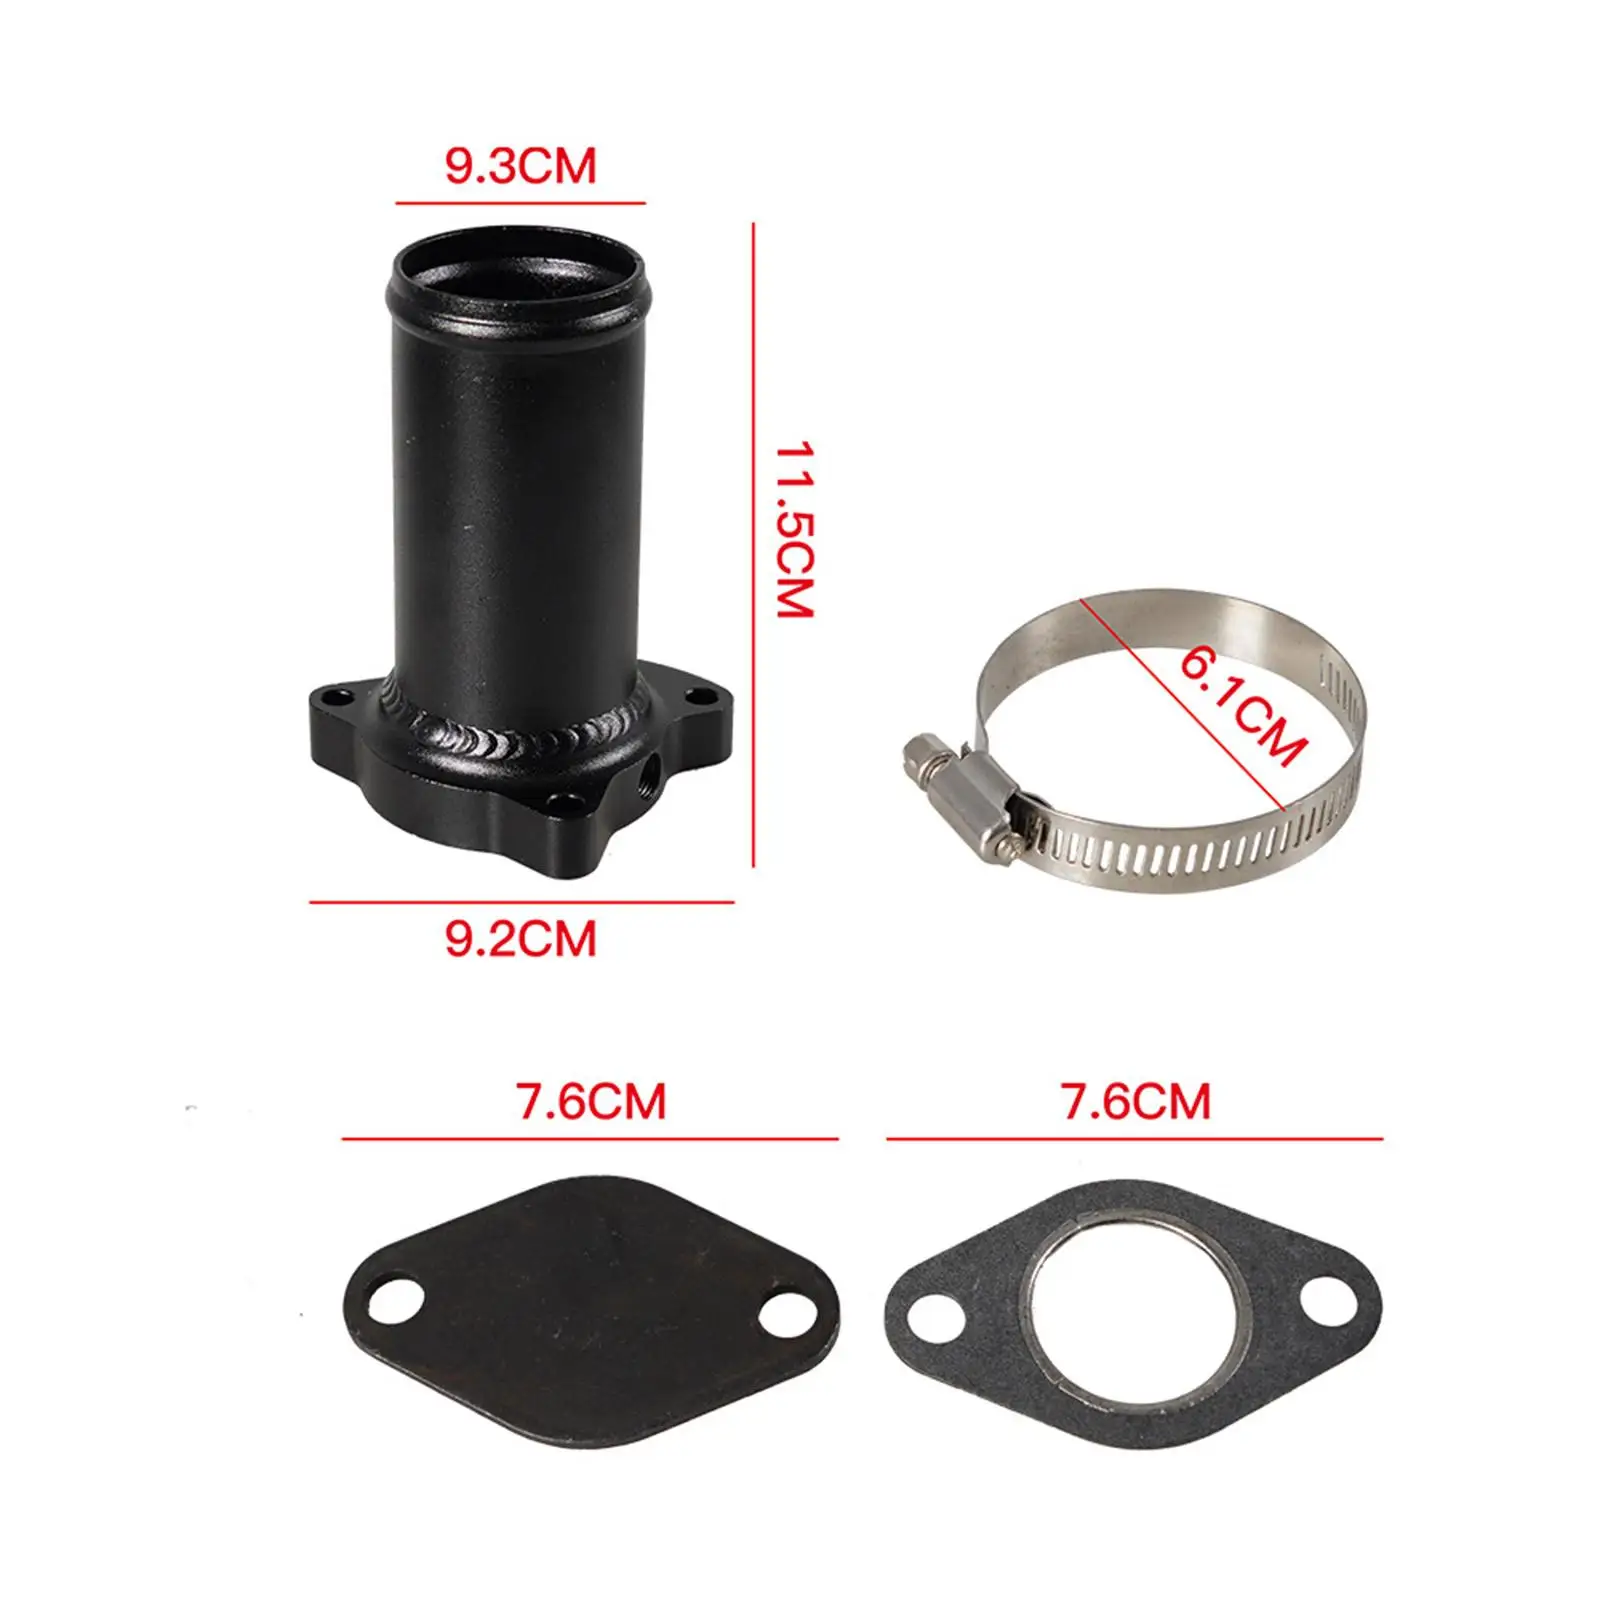 Car Exhaust Pipe Circulation Valve Fits for 1.9 8V Tdi Ve 90 110 Professional Aluminum Alloy Accessories Spare Parts